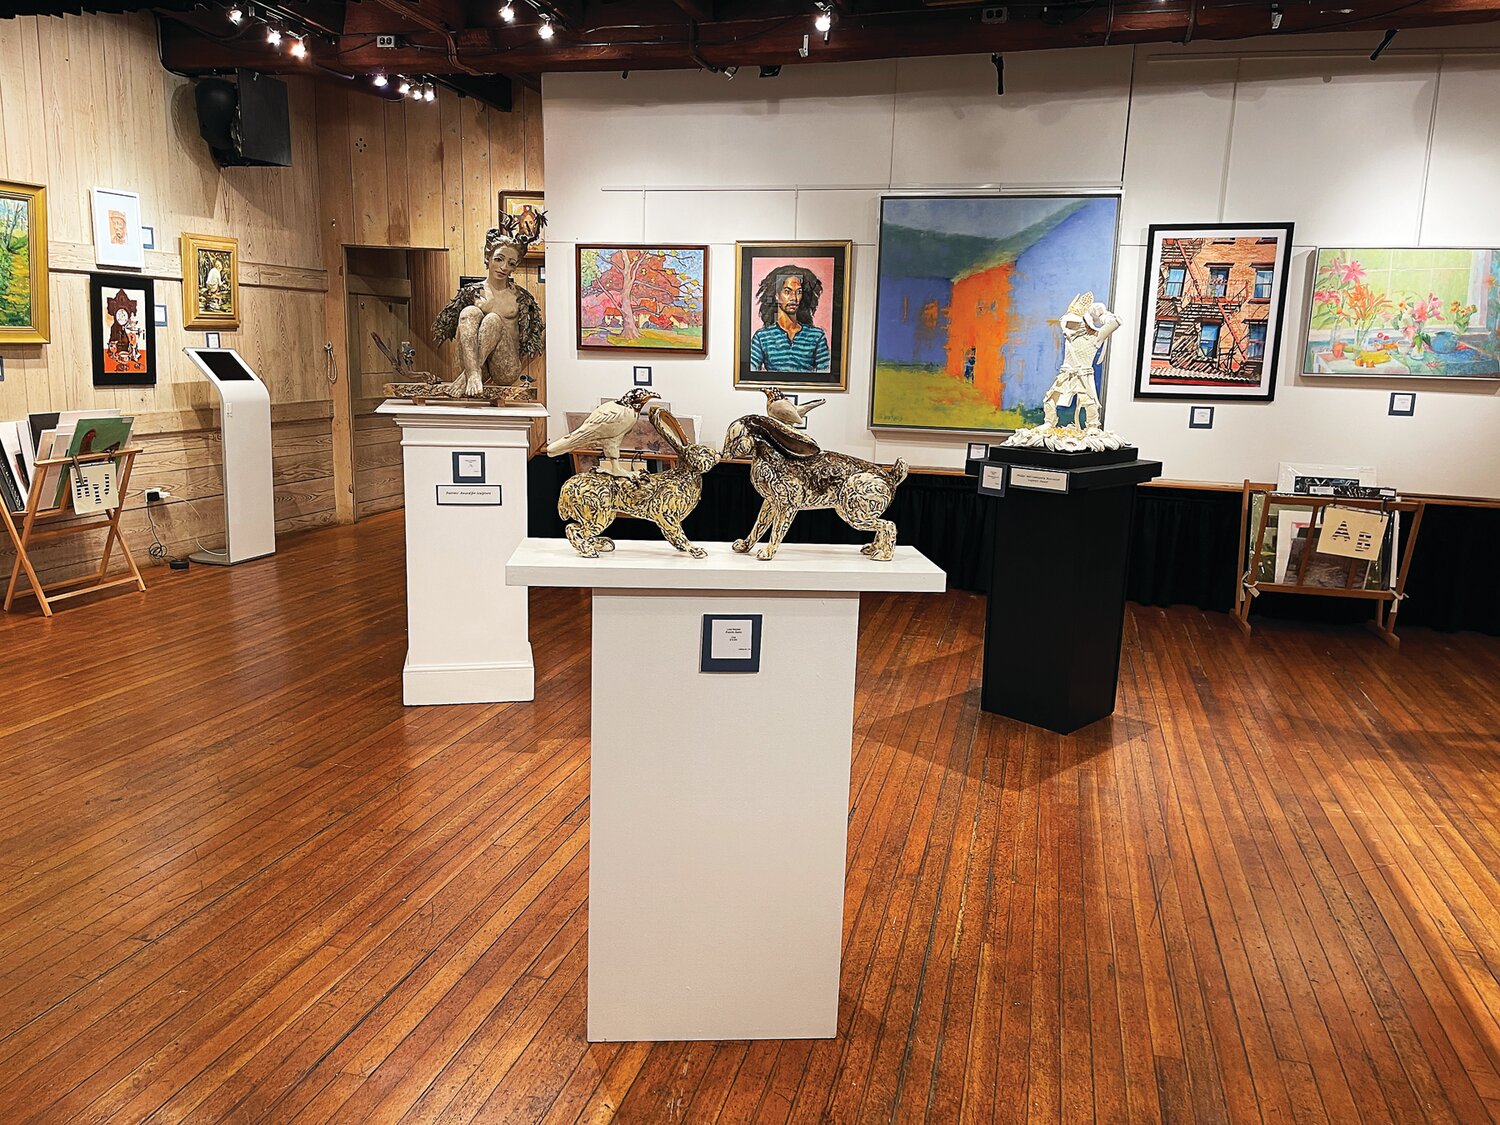 The upper gallery at the 94th Juried Art Show at Phillips’ Mill.